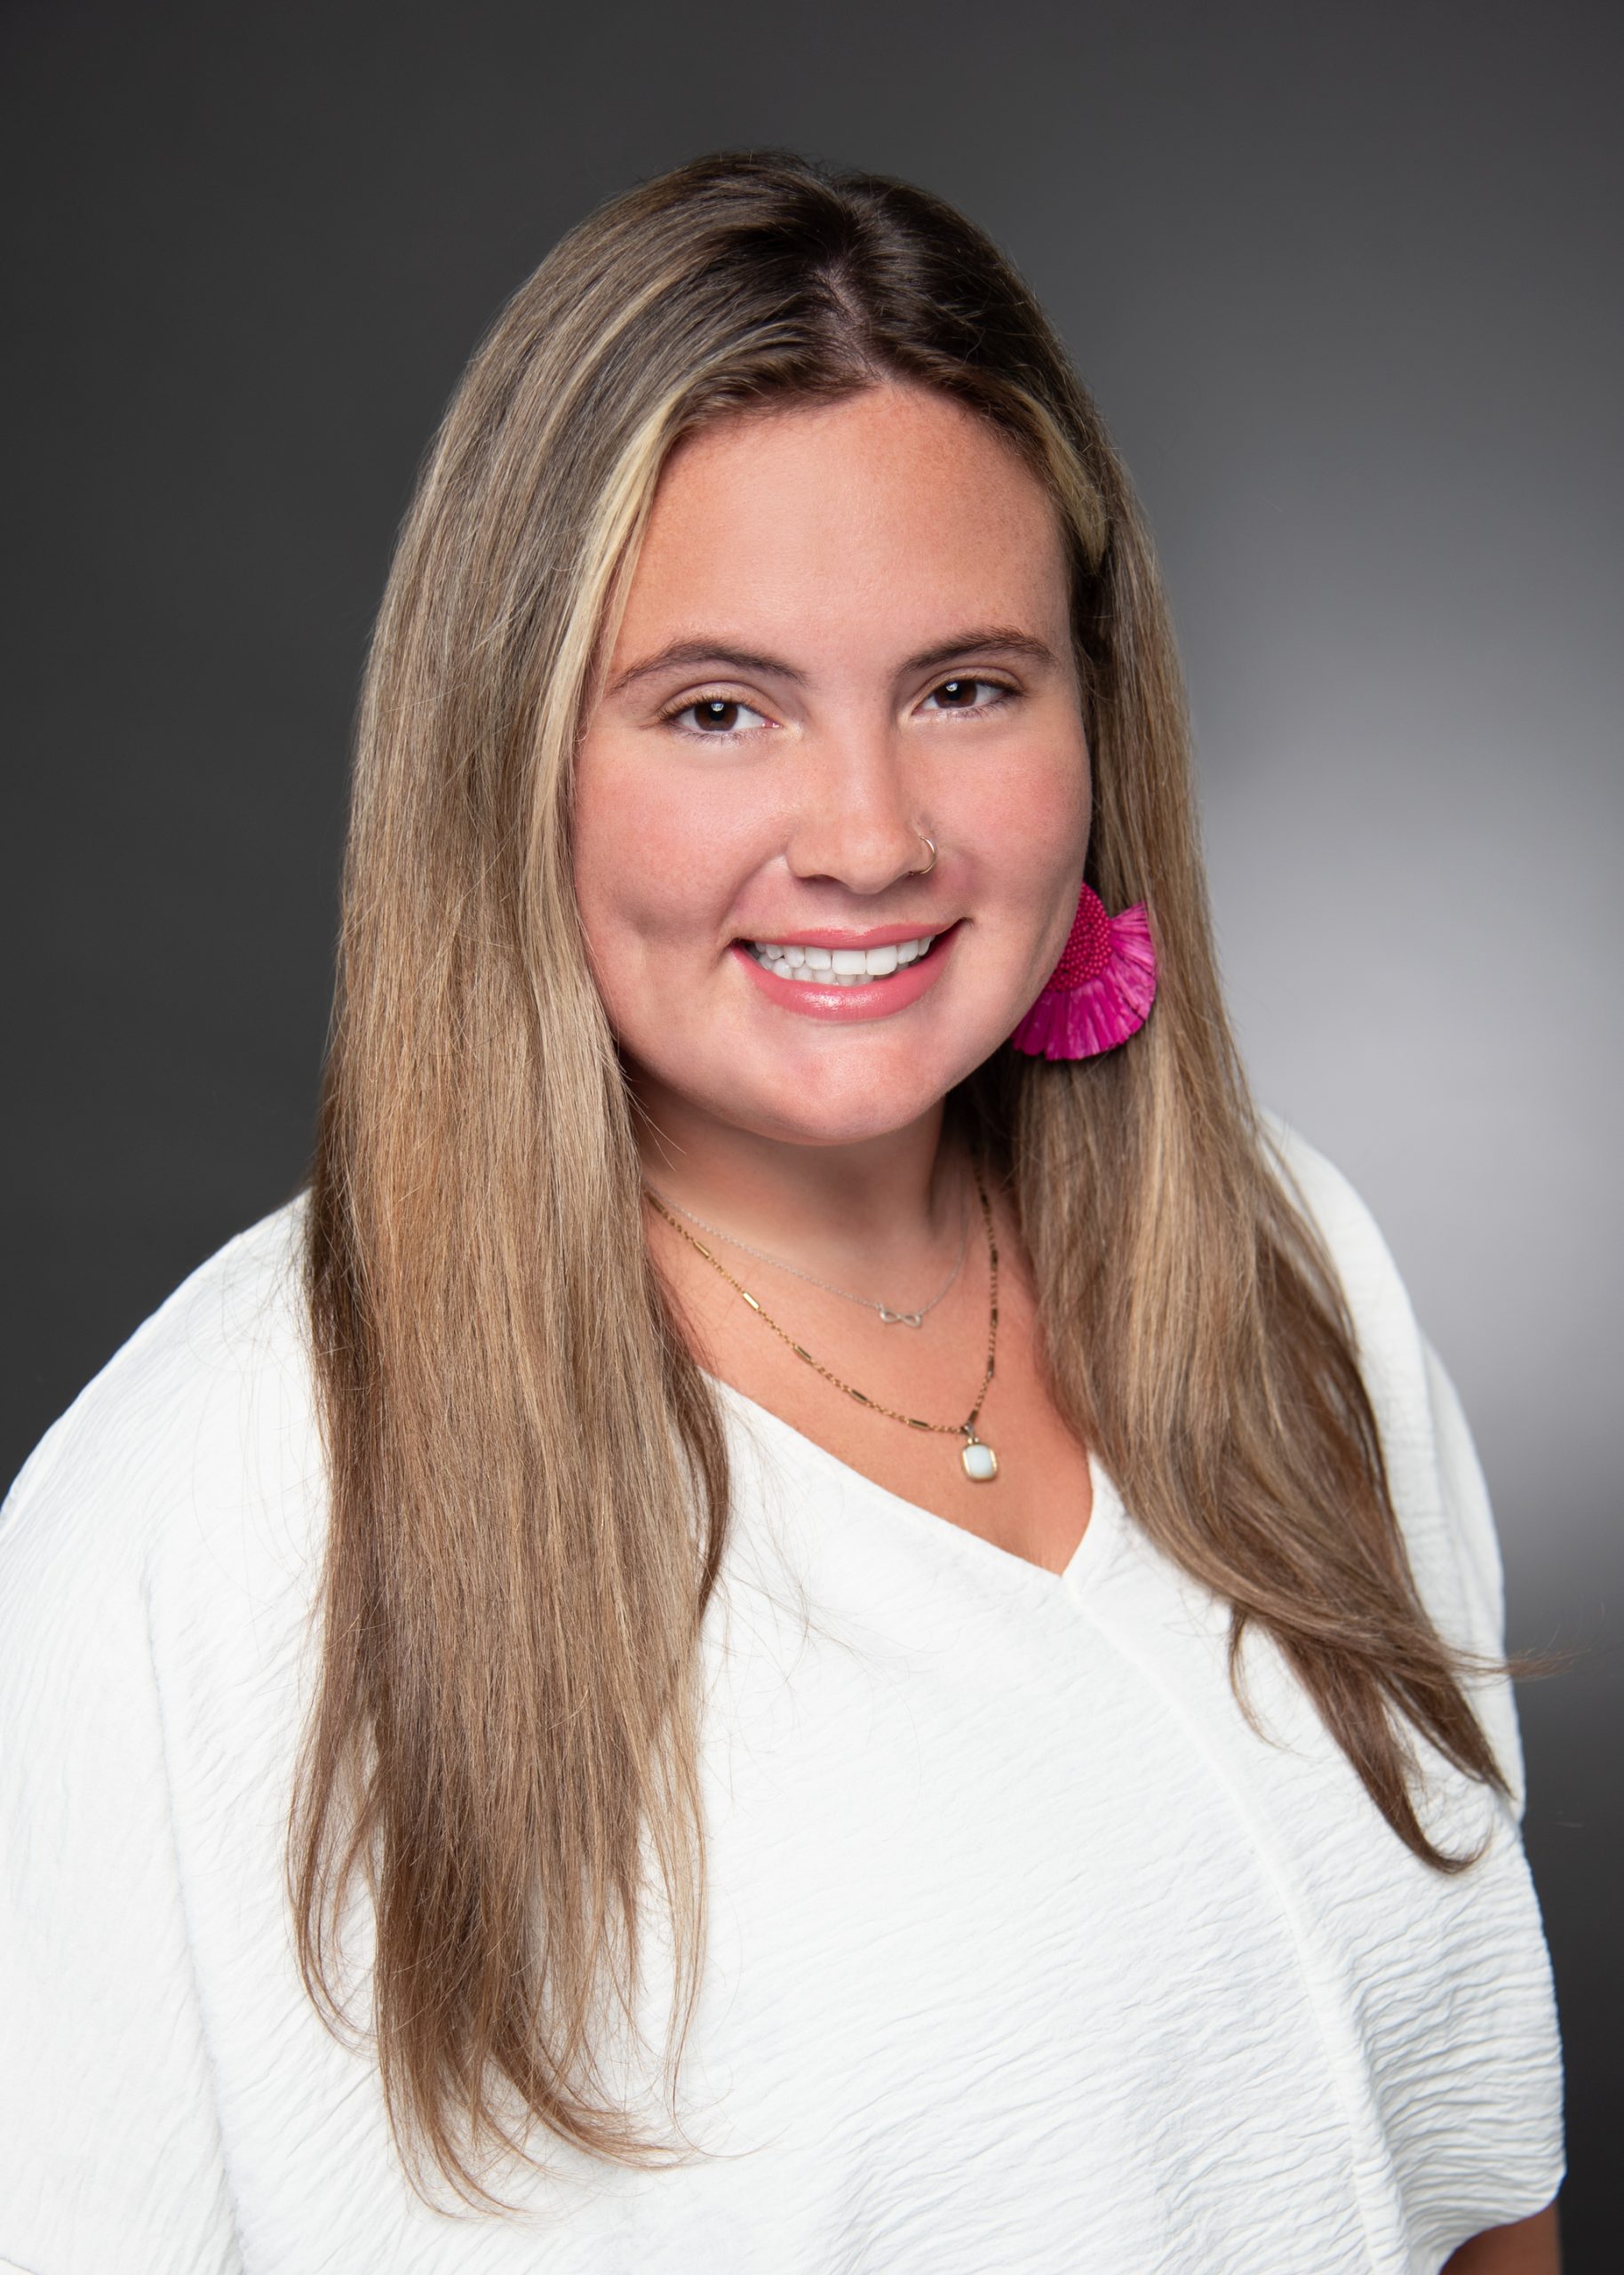 professional headshot of Mallory Howard, Audit Senior, wearing a white blouse and pink earrings